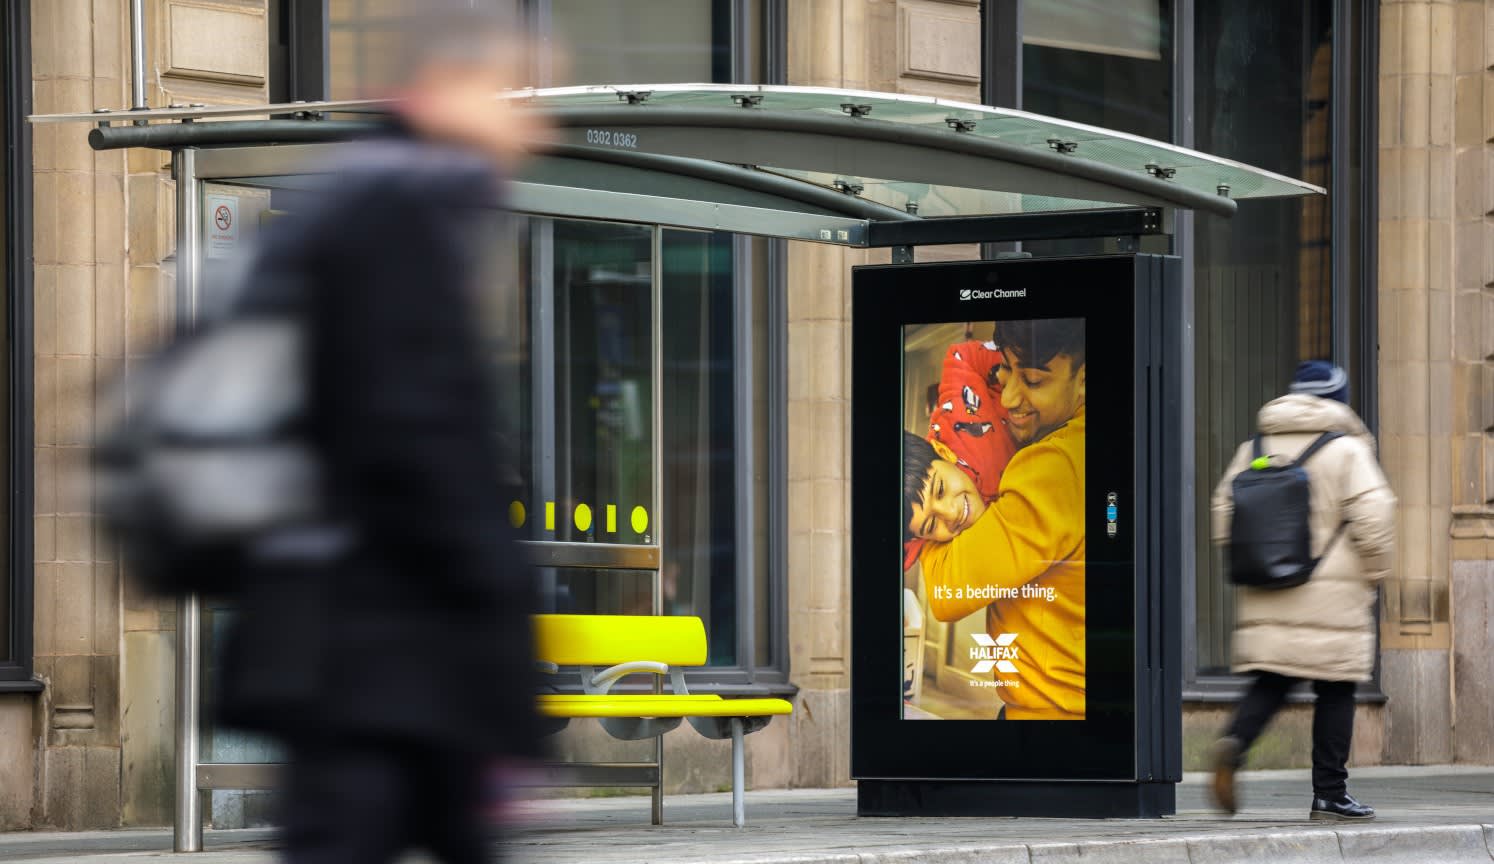 Halifax ad showing on a digital bus shelter screen with man walking past